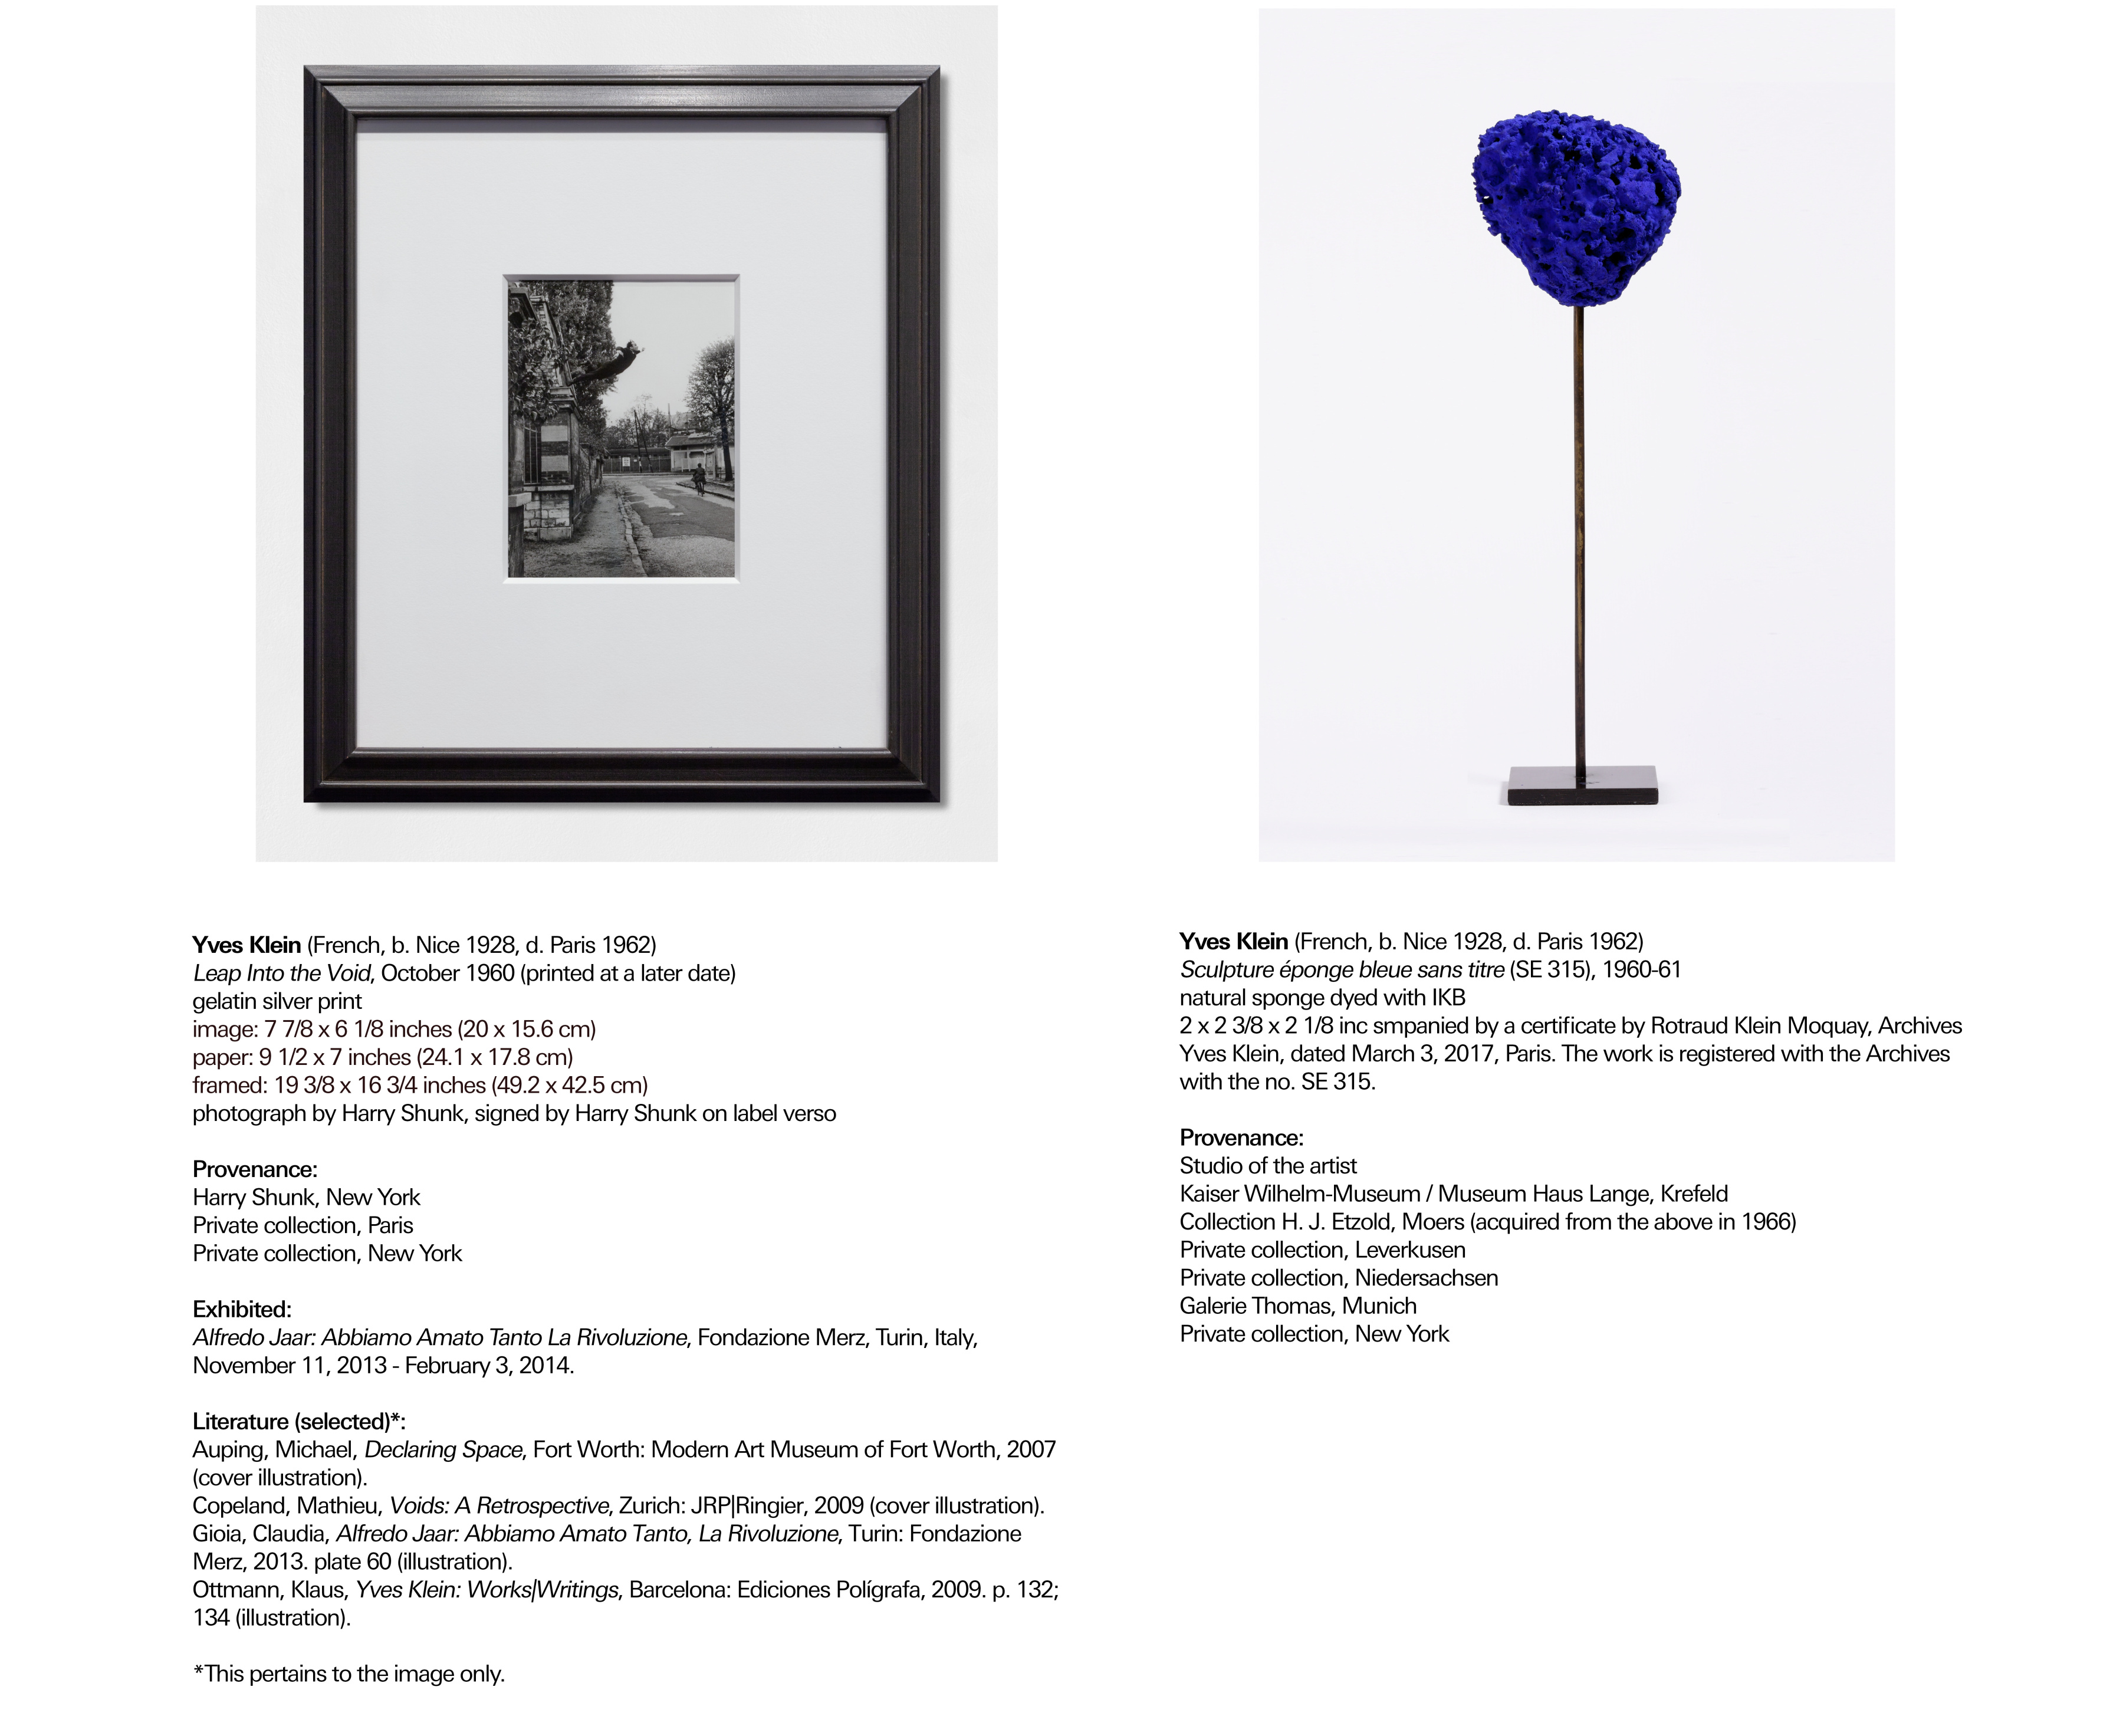 TEFAF NY 2022 - Booth 363 - Viewing Room - Sean Kelly Gallery - Online Exhibition